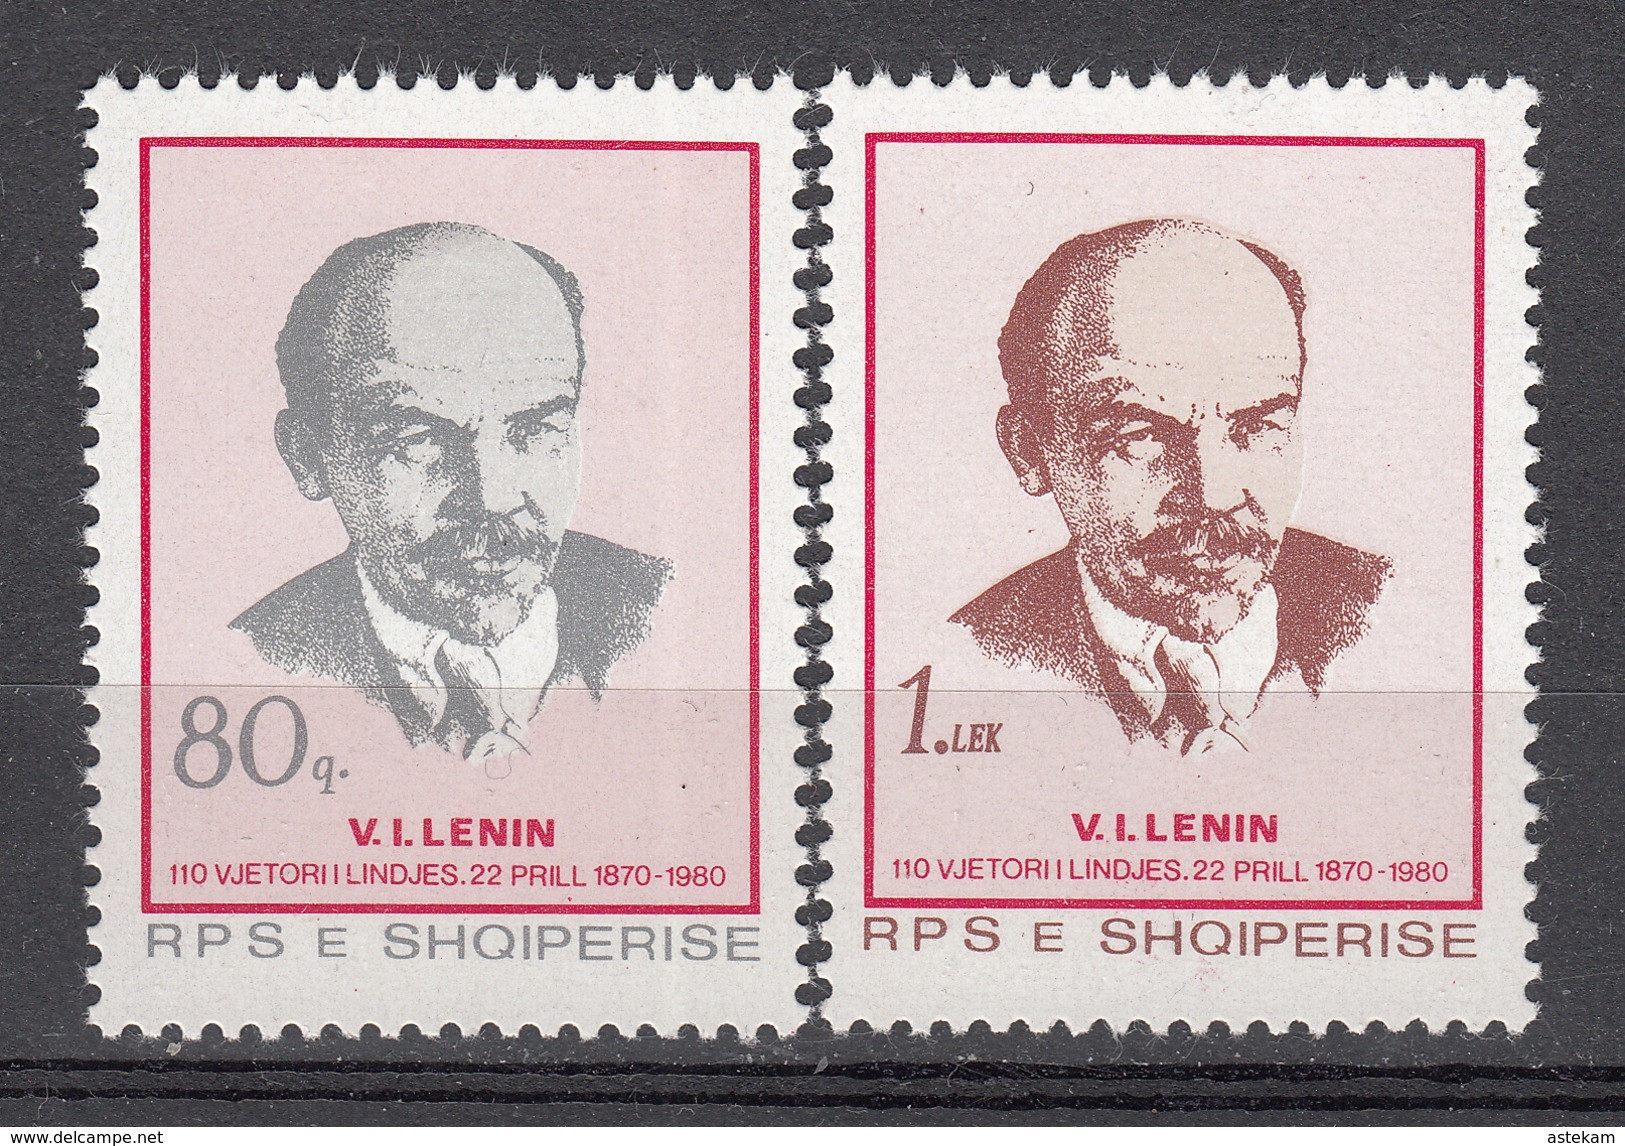 ALBANIA 1980, 110th ANNIVERSARY Of LENIN, COMPLETE, MNH SERIES With GOOD QUALITY, *** - Lenin